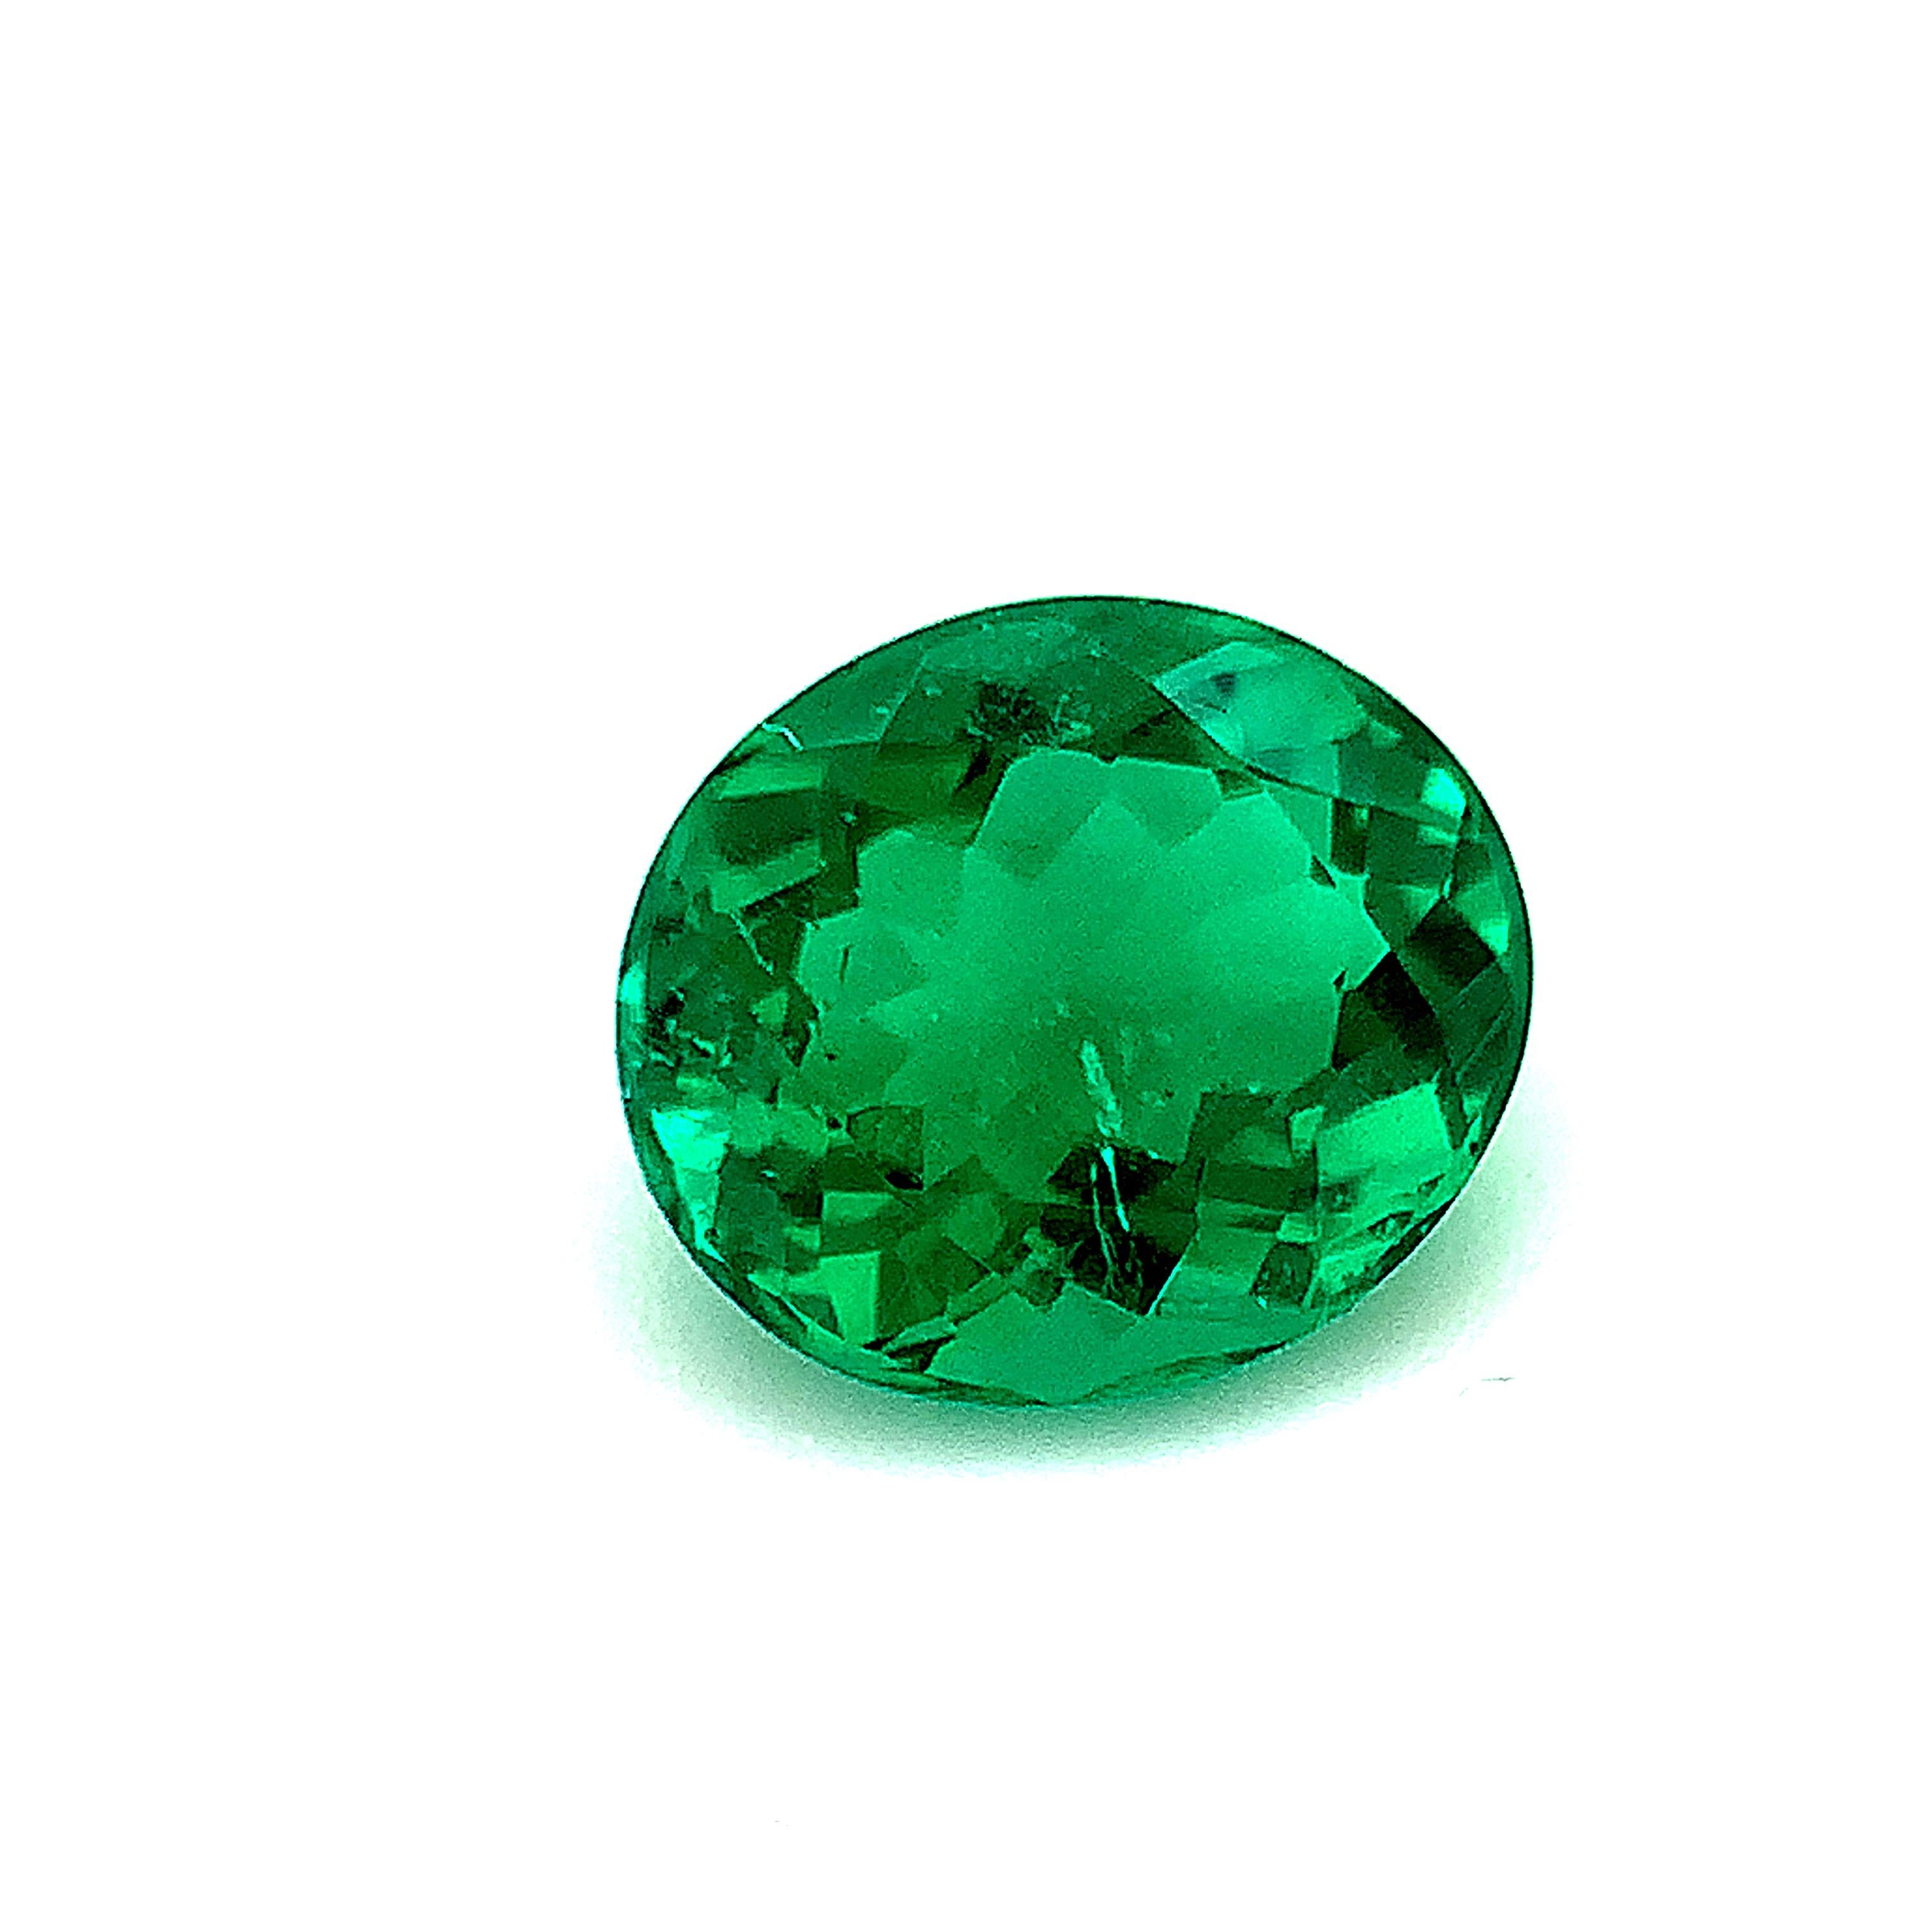 Artisan 1.37 Carat Emerald Oval, Unset Loose Gemstone, GIA Certified For Sale